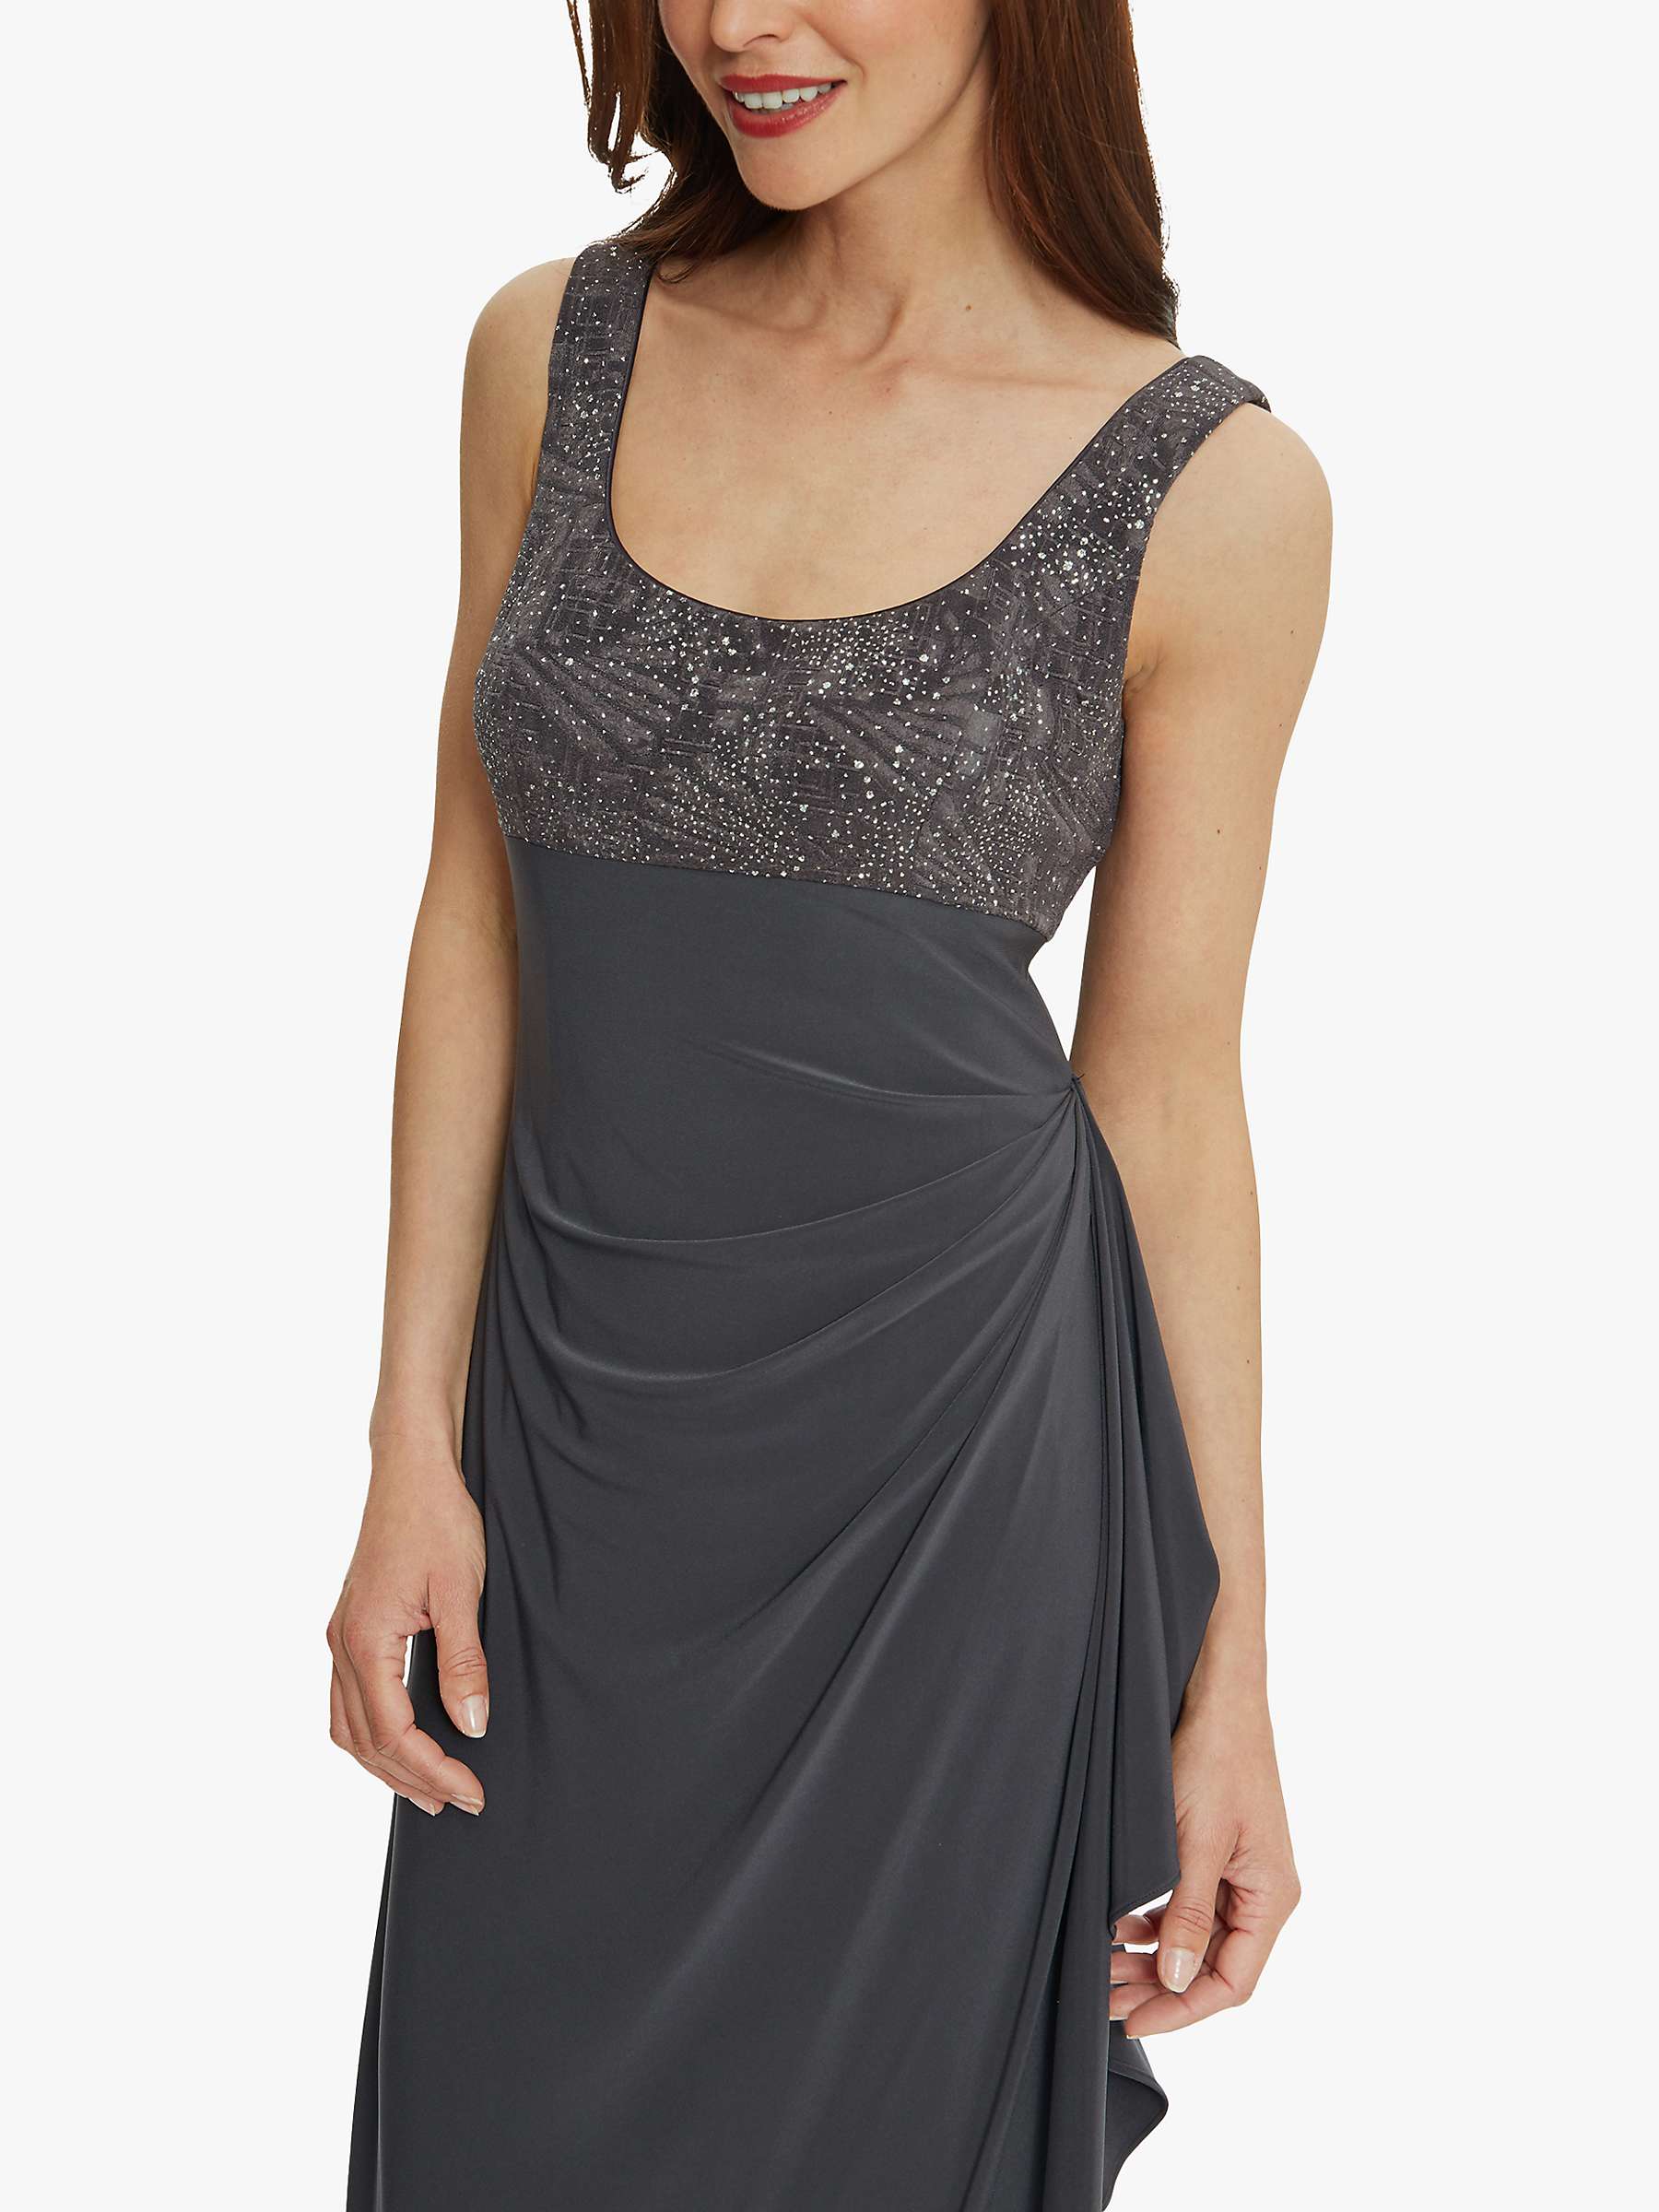 Buy Gina Bacconi Isy Long Side Ruched Gown, Charcoal Online at johnlewis.com